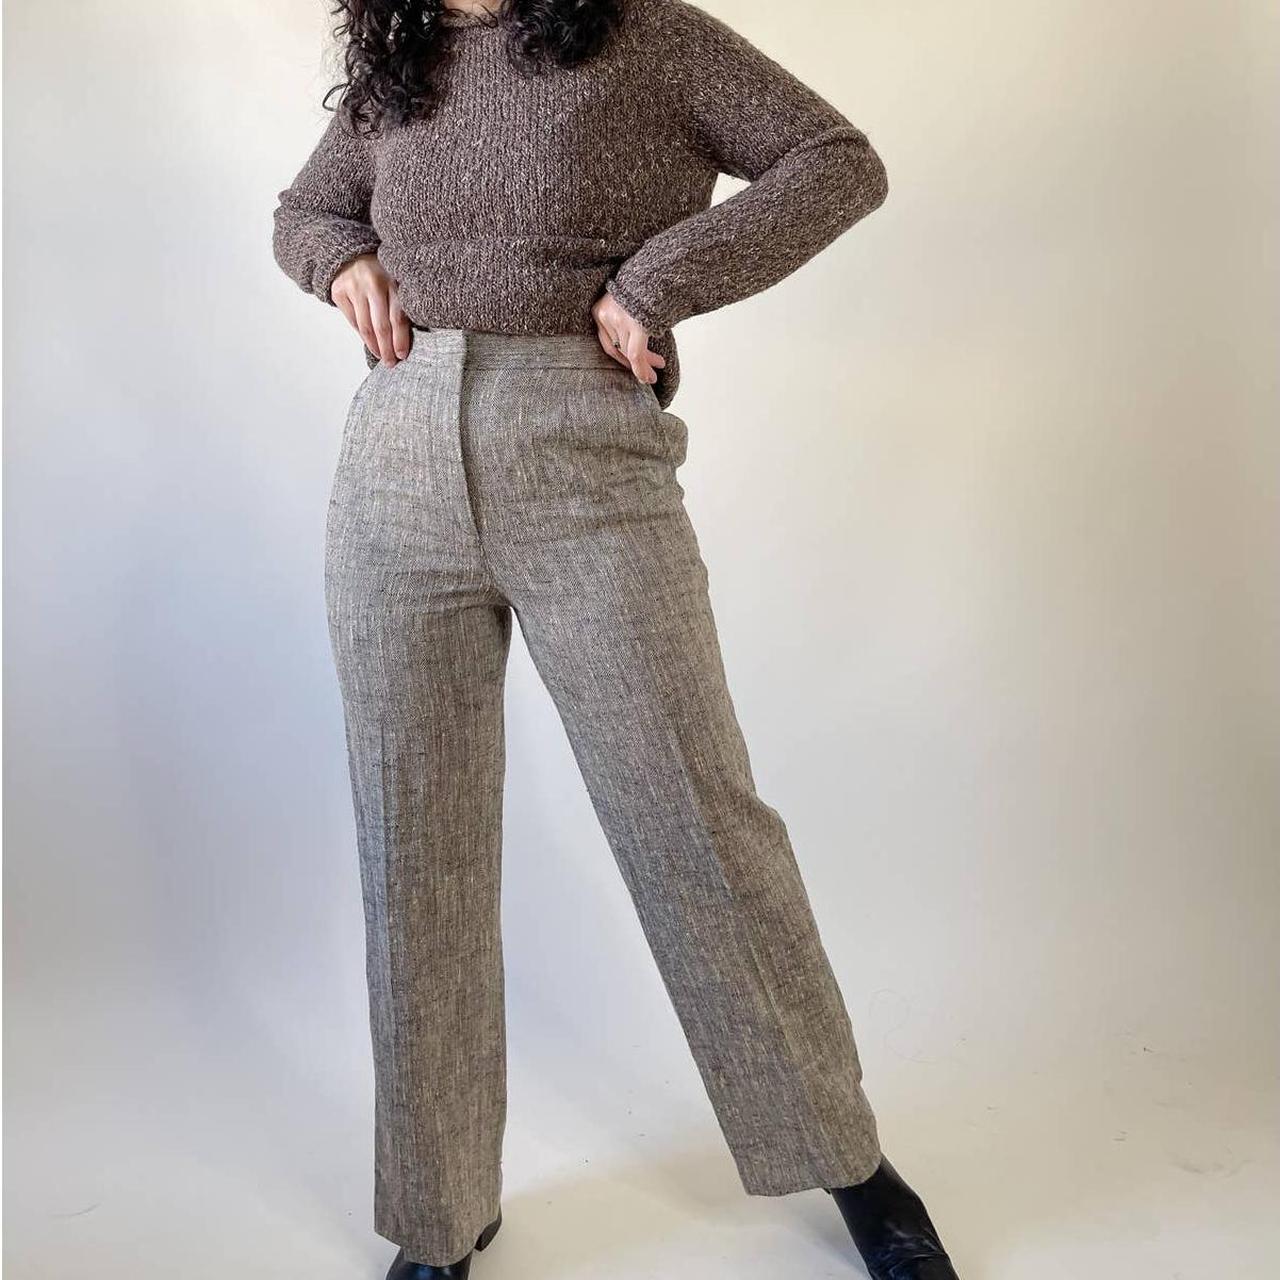 Women's Tan and Brown Trousers (3)